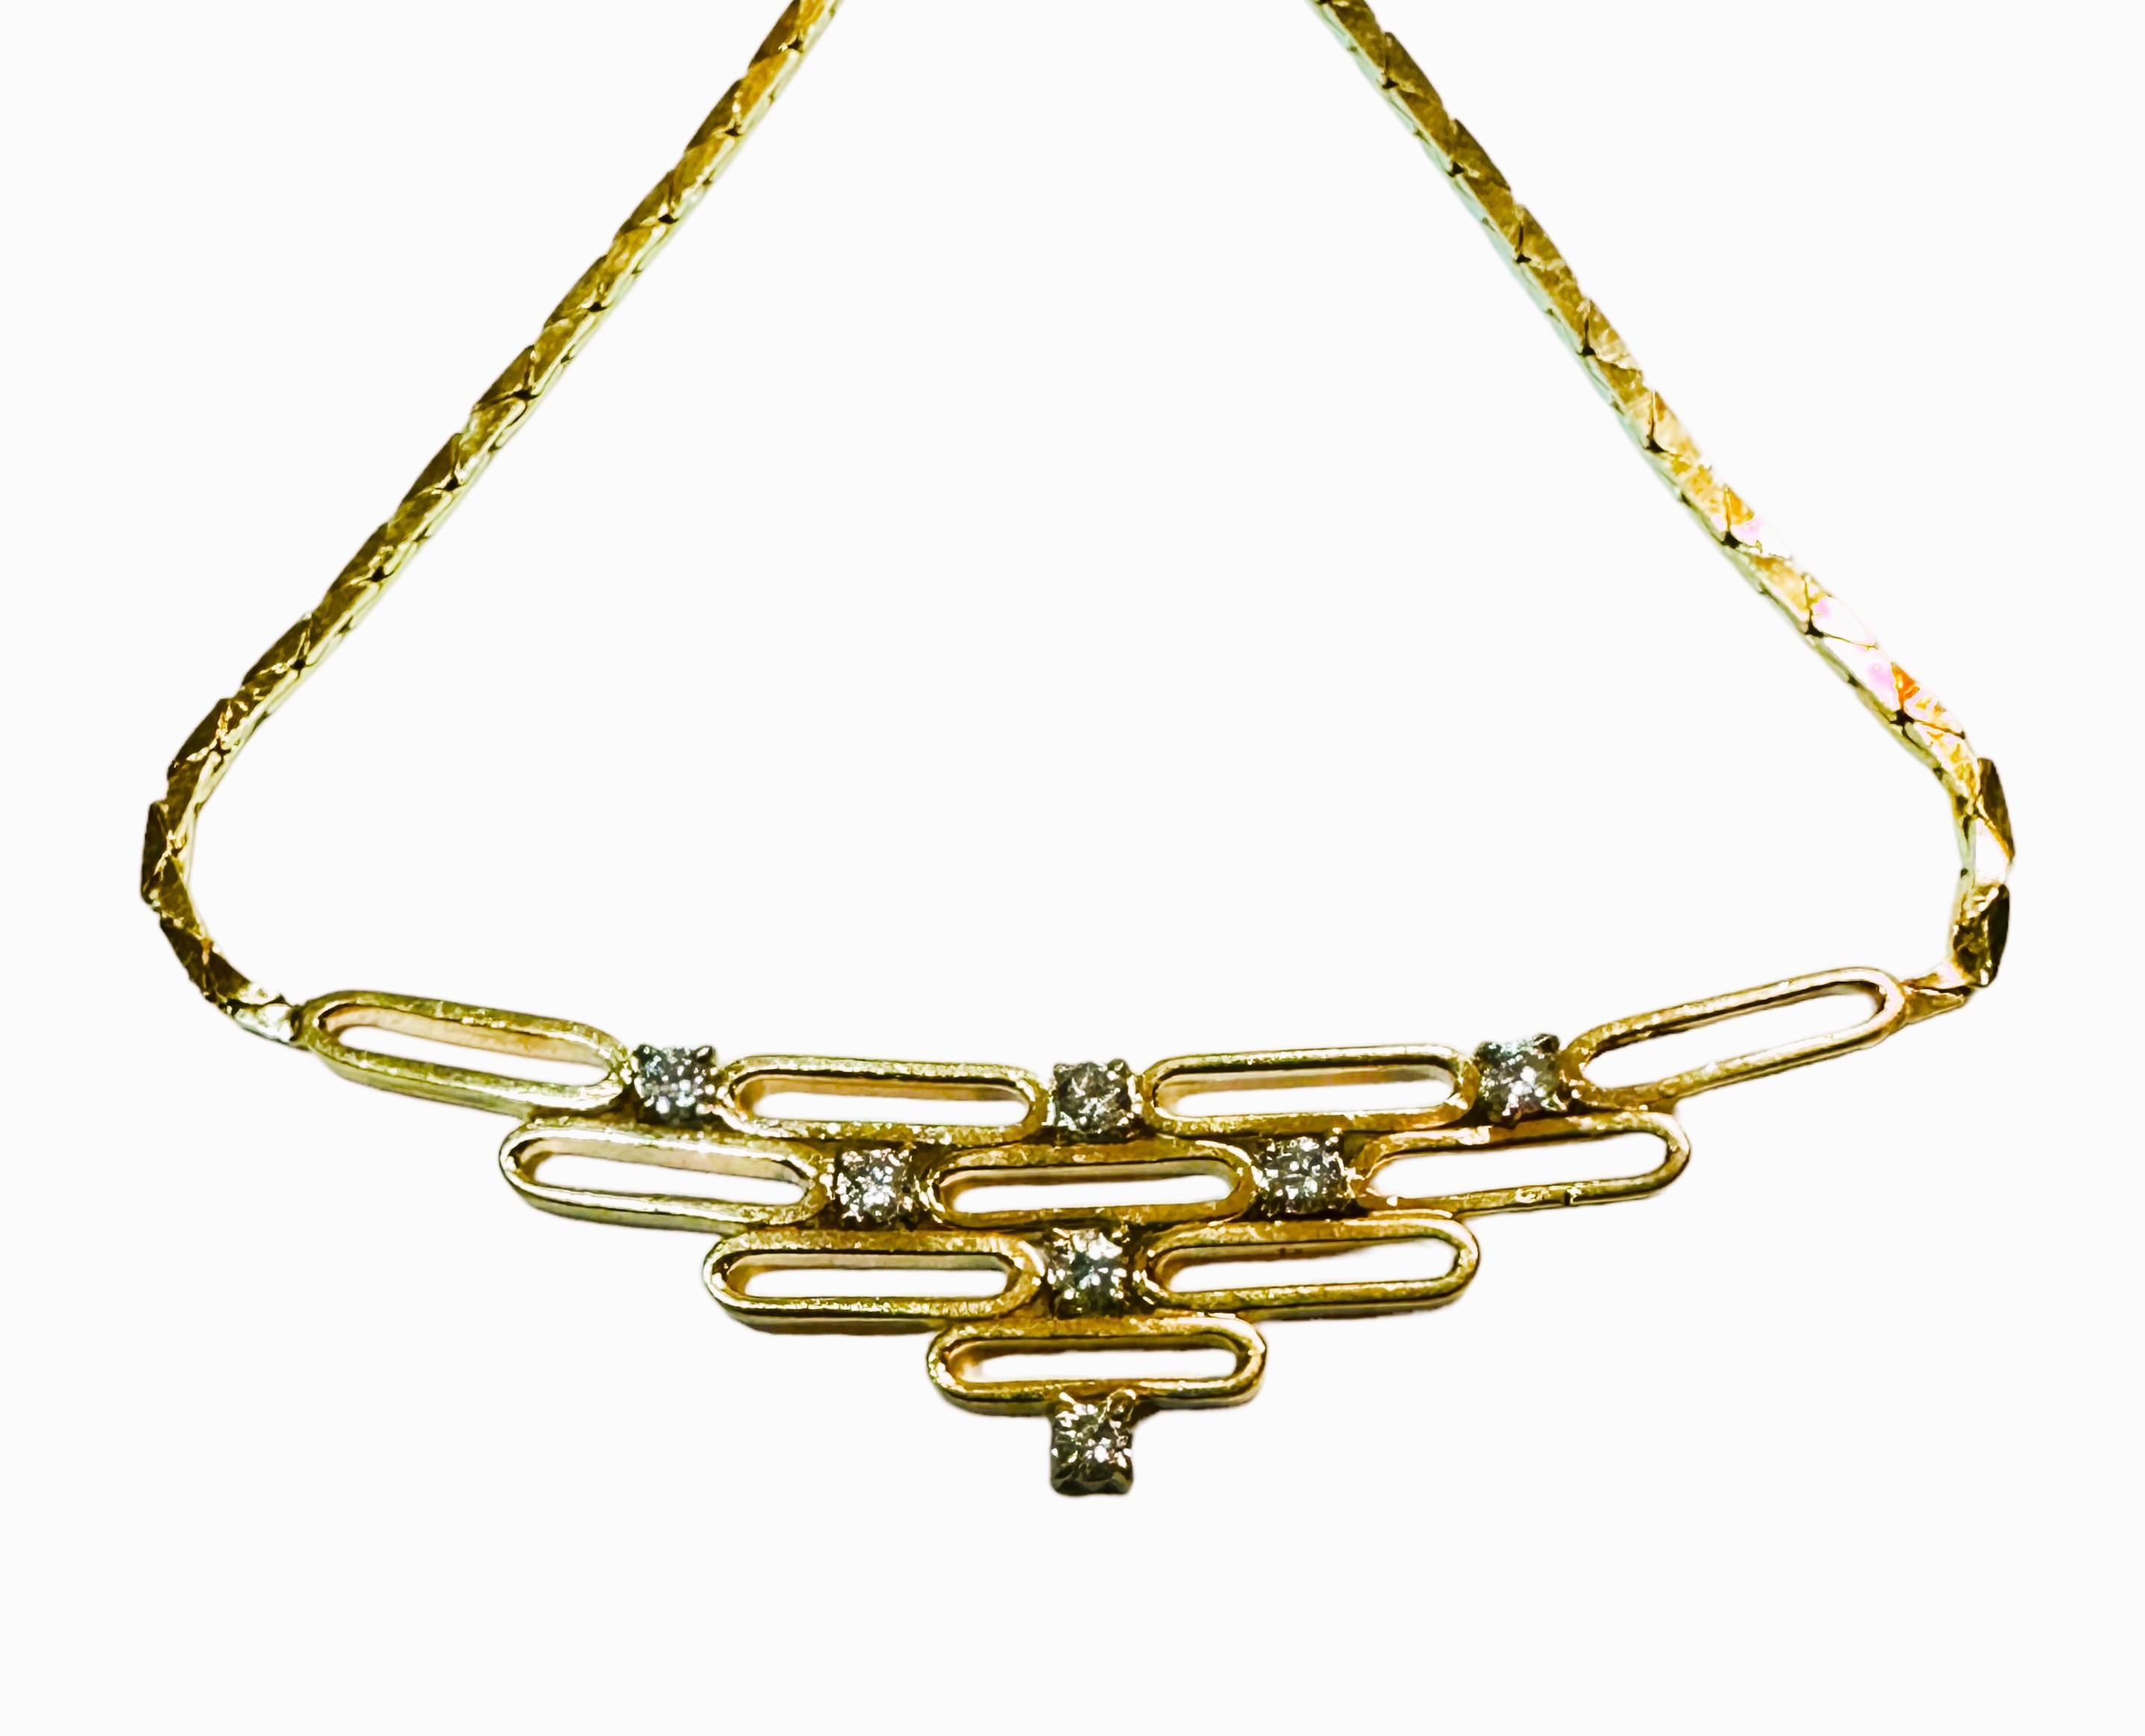 Brilliant Cut 14k Italian MCM Yellow Gold .25 ct Diamond Necklace with Appraisal For Sale